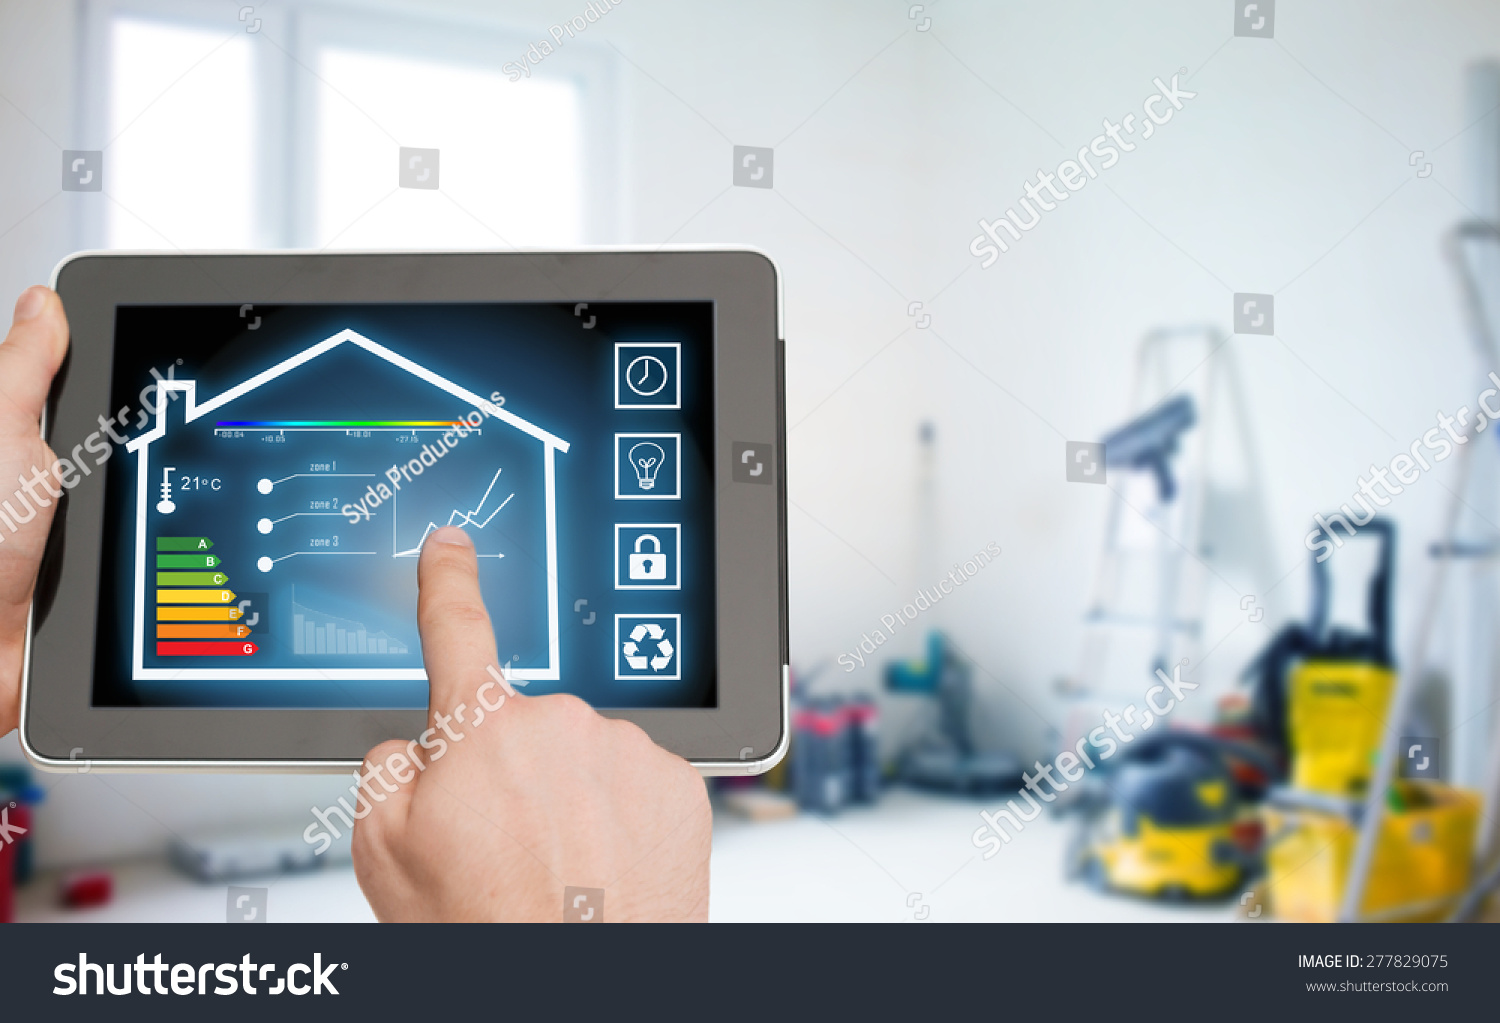 home, housing, people and technology concept - close up of man hands pointing finger to tablet pc computer and regulating room temperature over storeroom or building background #277829075